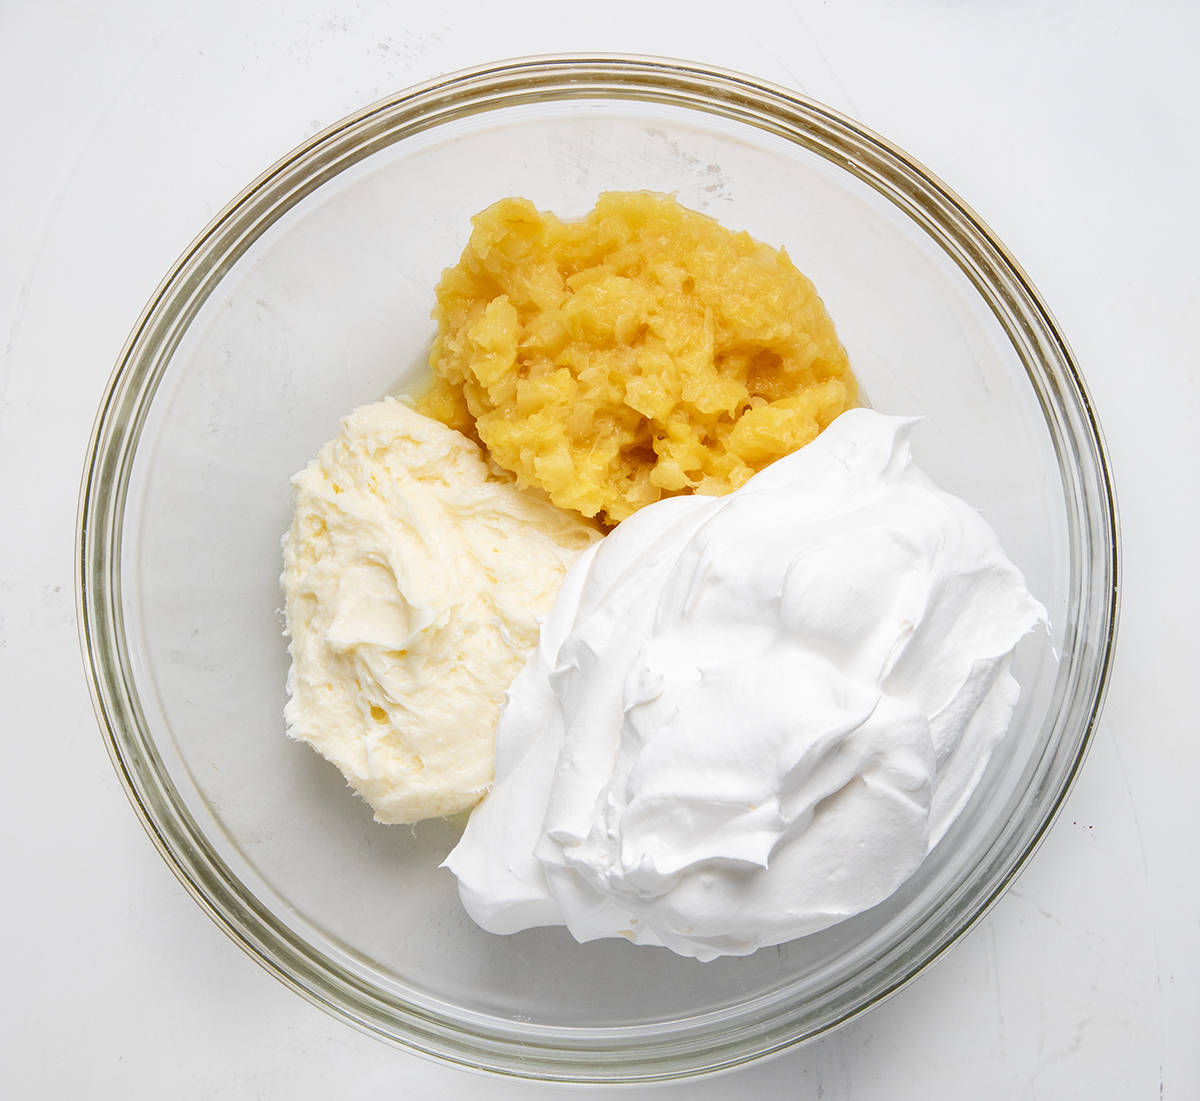 Glass bowl of ingredients used to make Pineapple Pretzel Fluff.